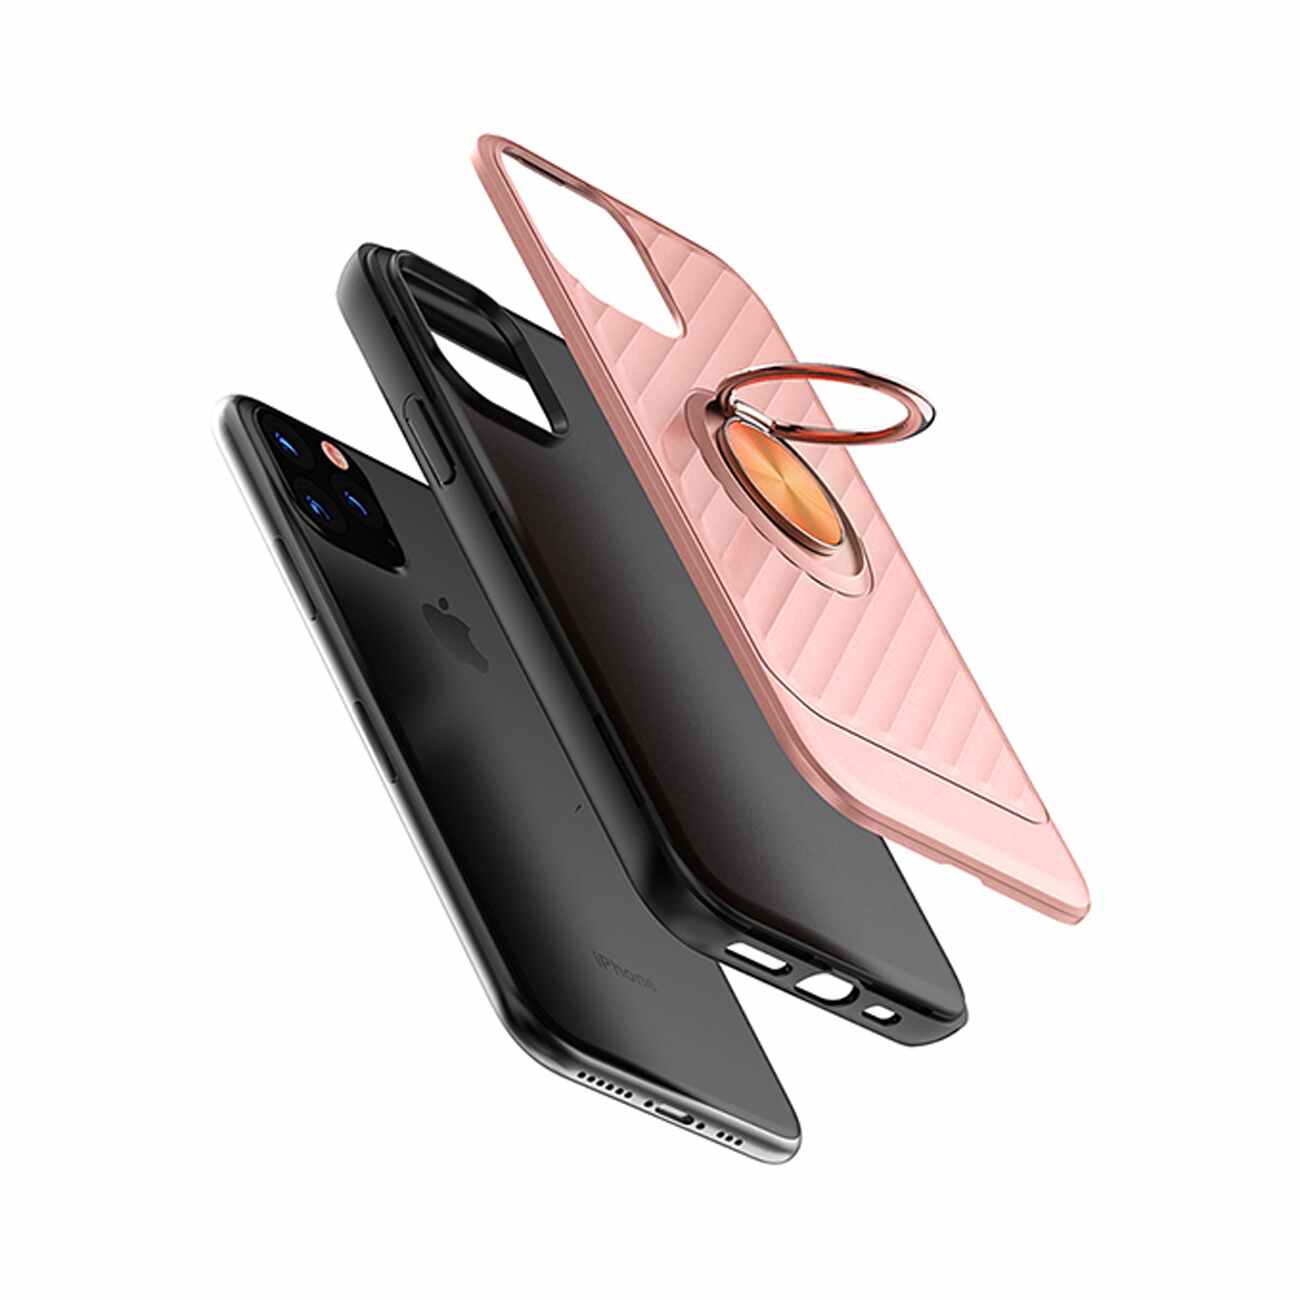 APPLE IPHONE 11 PRO Case with Ring Holder In Rose Gold